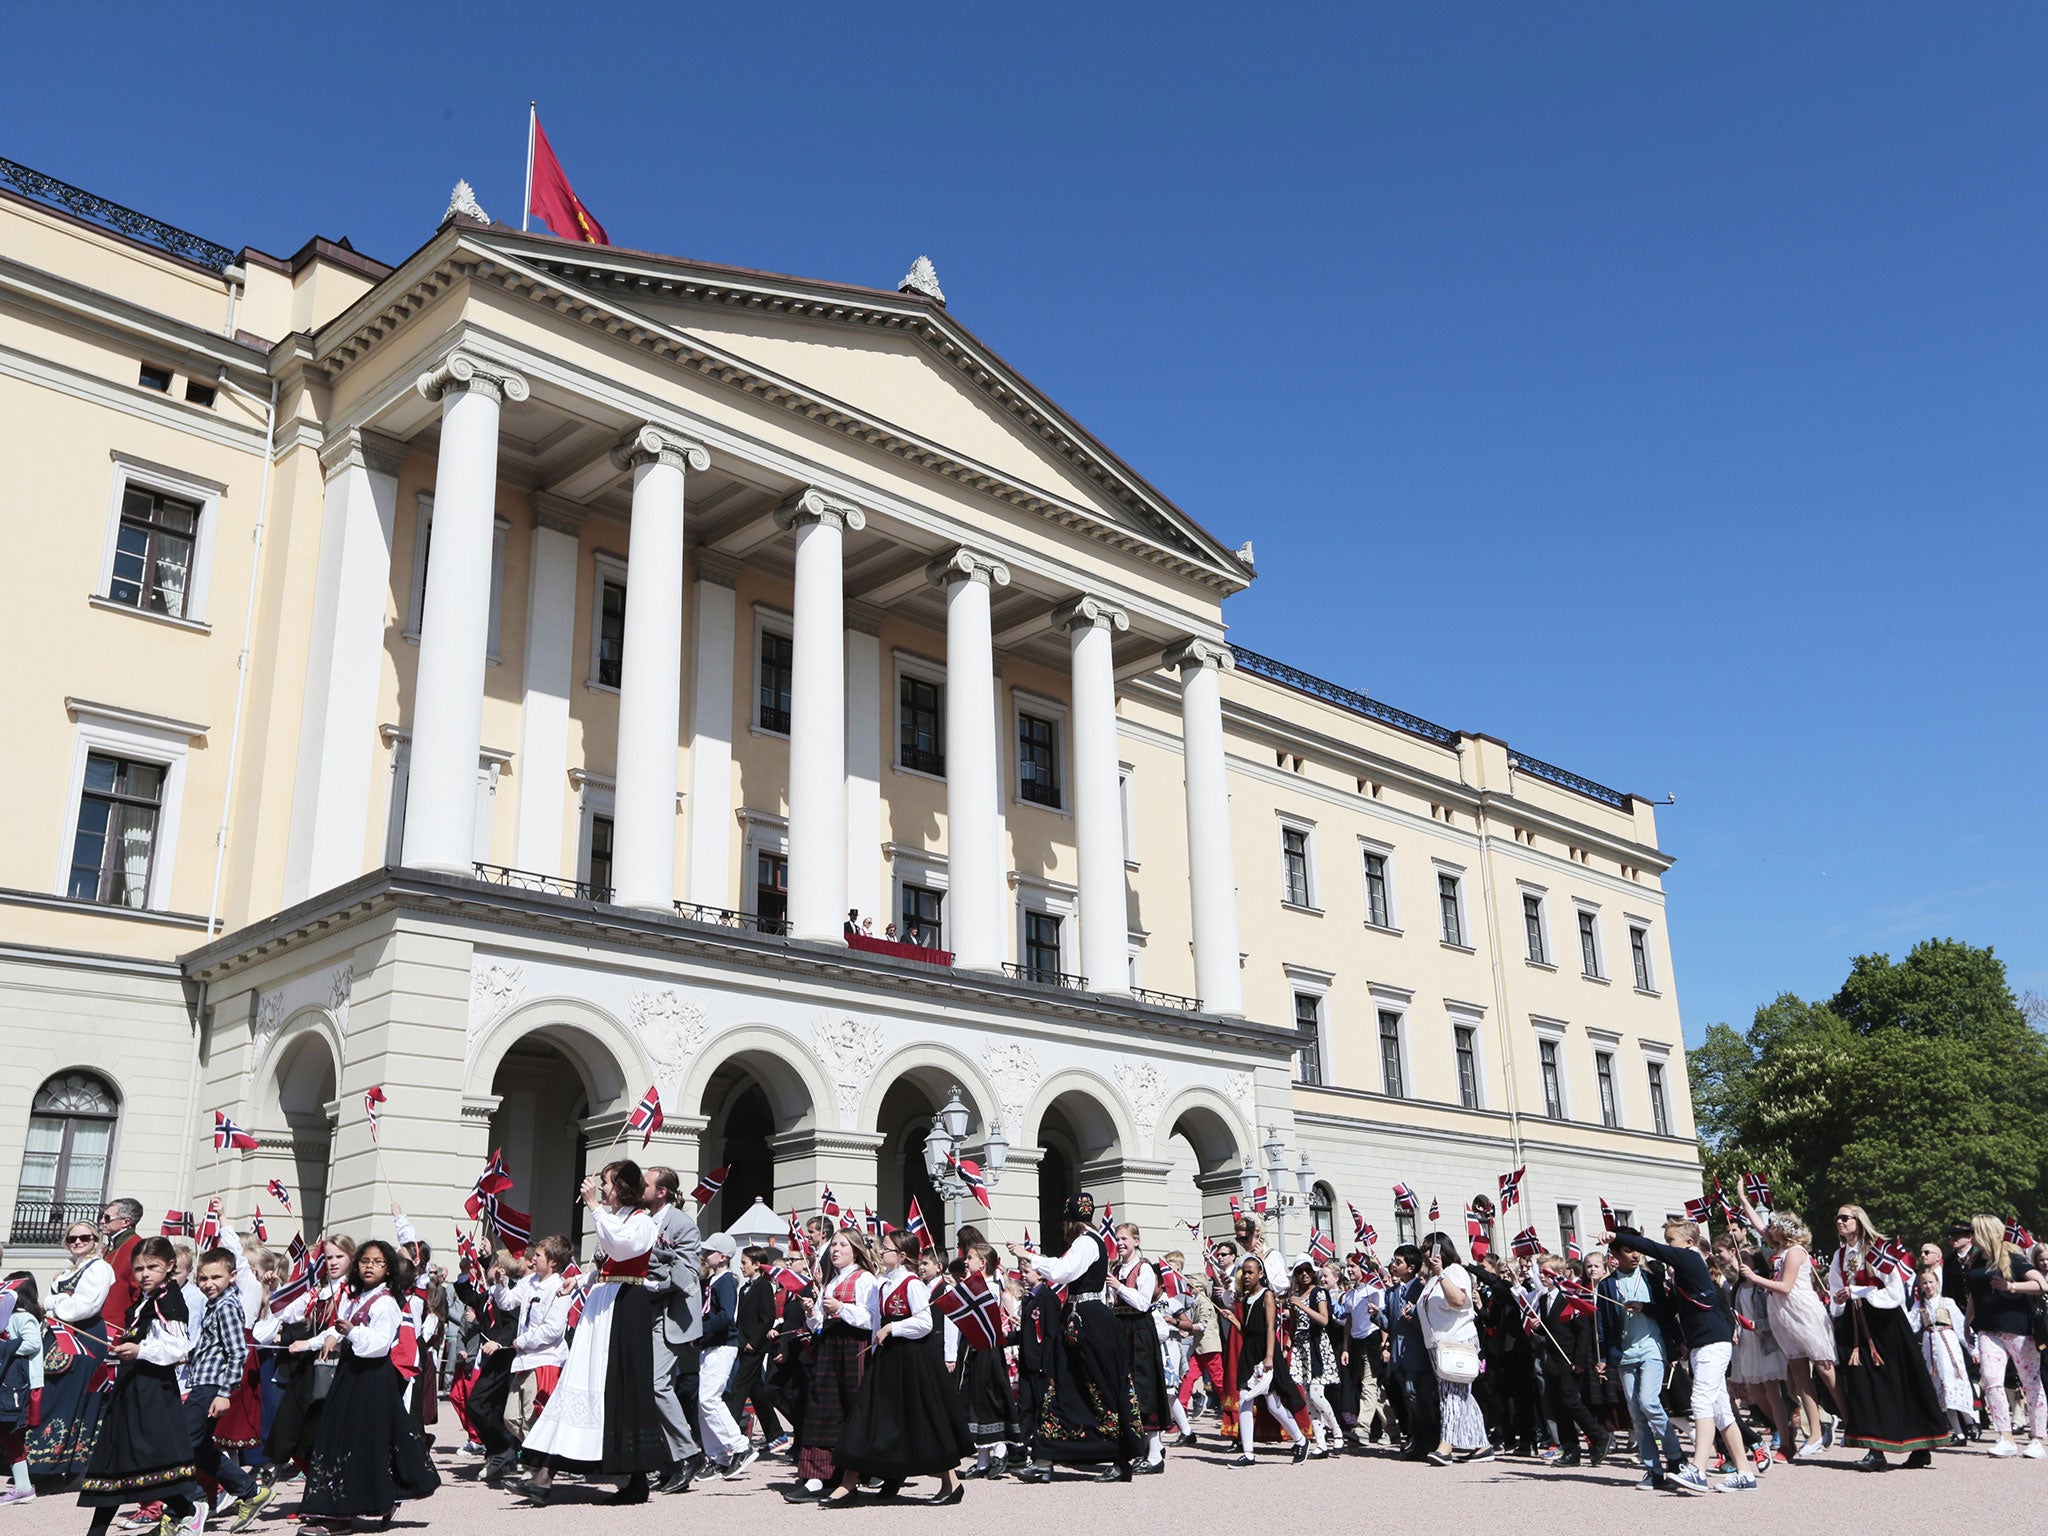 Norway's Royal Palace, pictured during 2014 celebrations of the country's Constitution Day